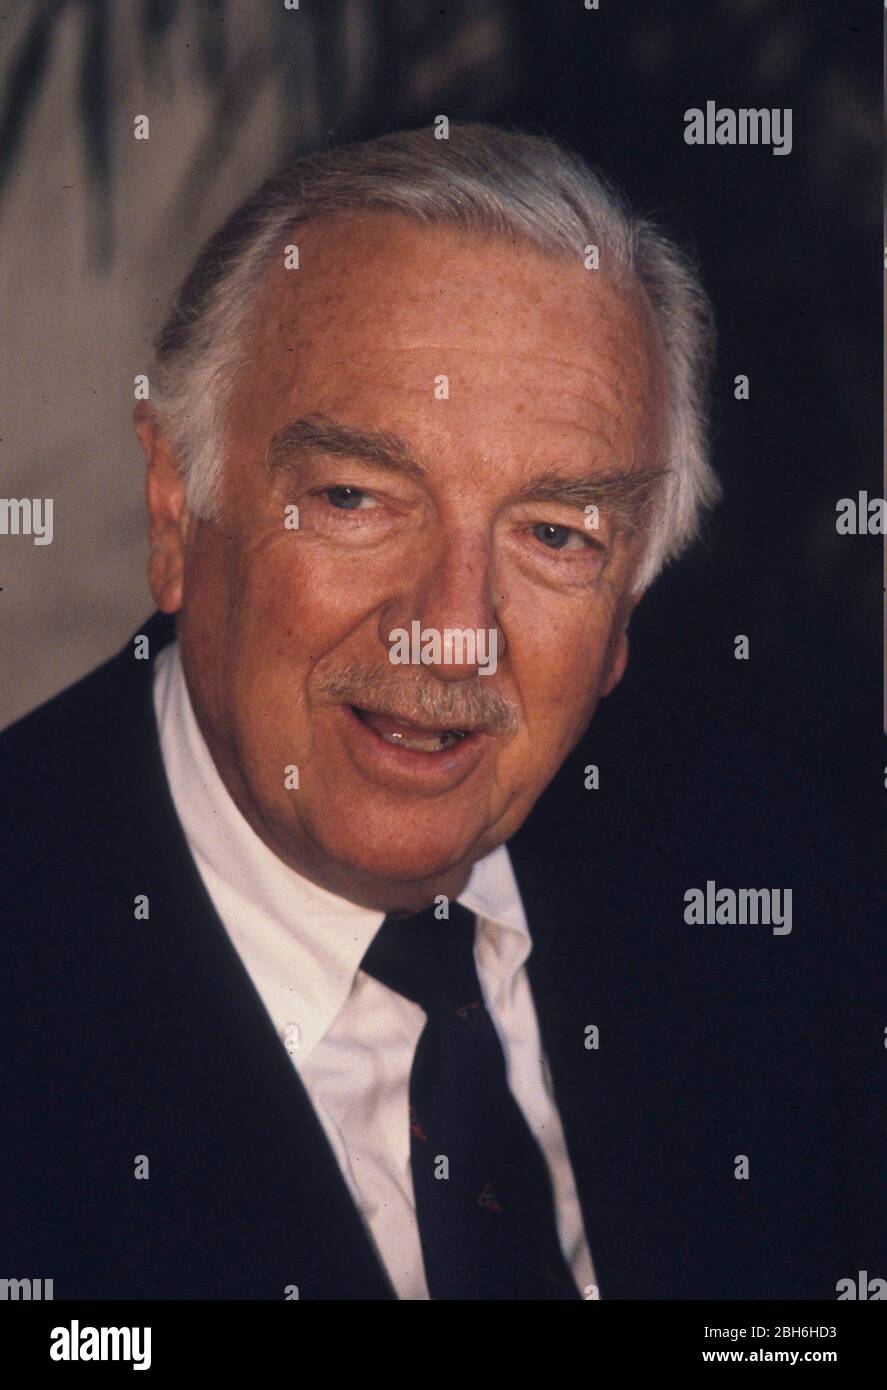 Austin, TX May 1989: CBS newsman Walter Cronkite speaks at a press conference for the Lower Colorado River Authority after narrating a video on environmental protection for the central Texas agency.  ©Bob Daemmrich Stock Photo